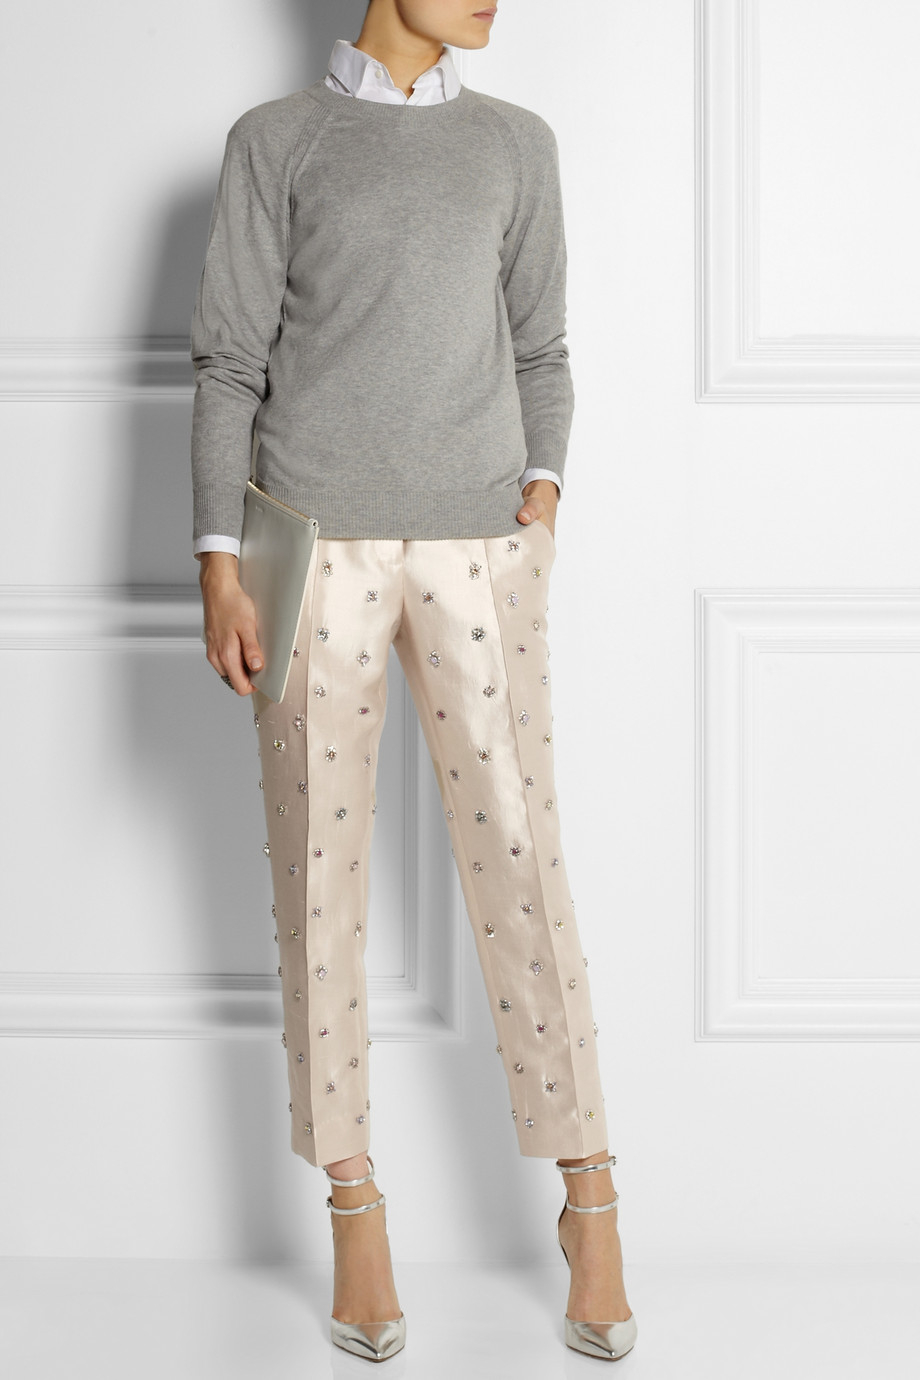 Lyst - J.crew Collection Embellished Shantung Straight-Leg Pants in White